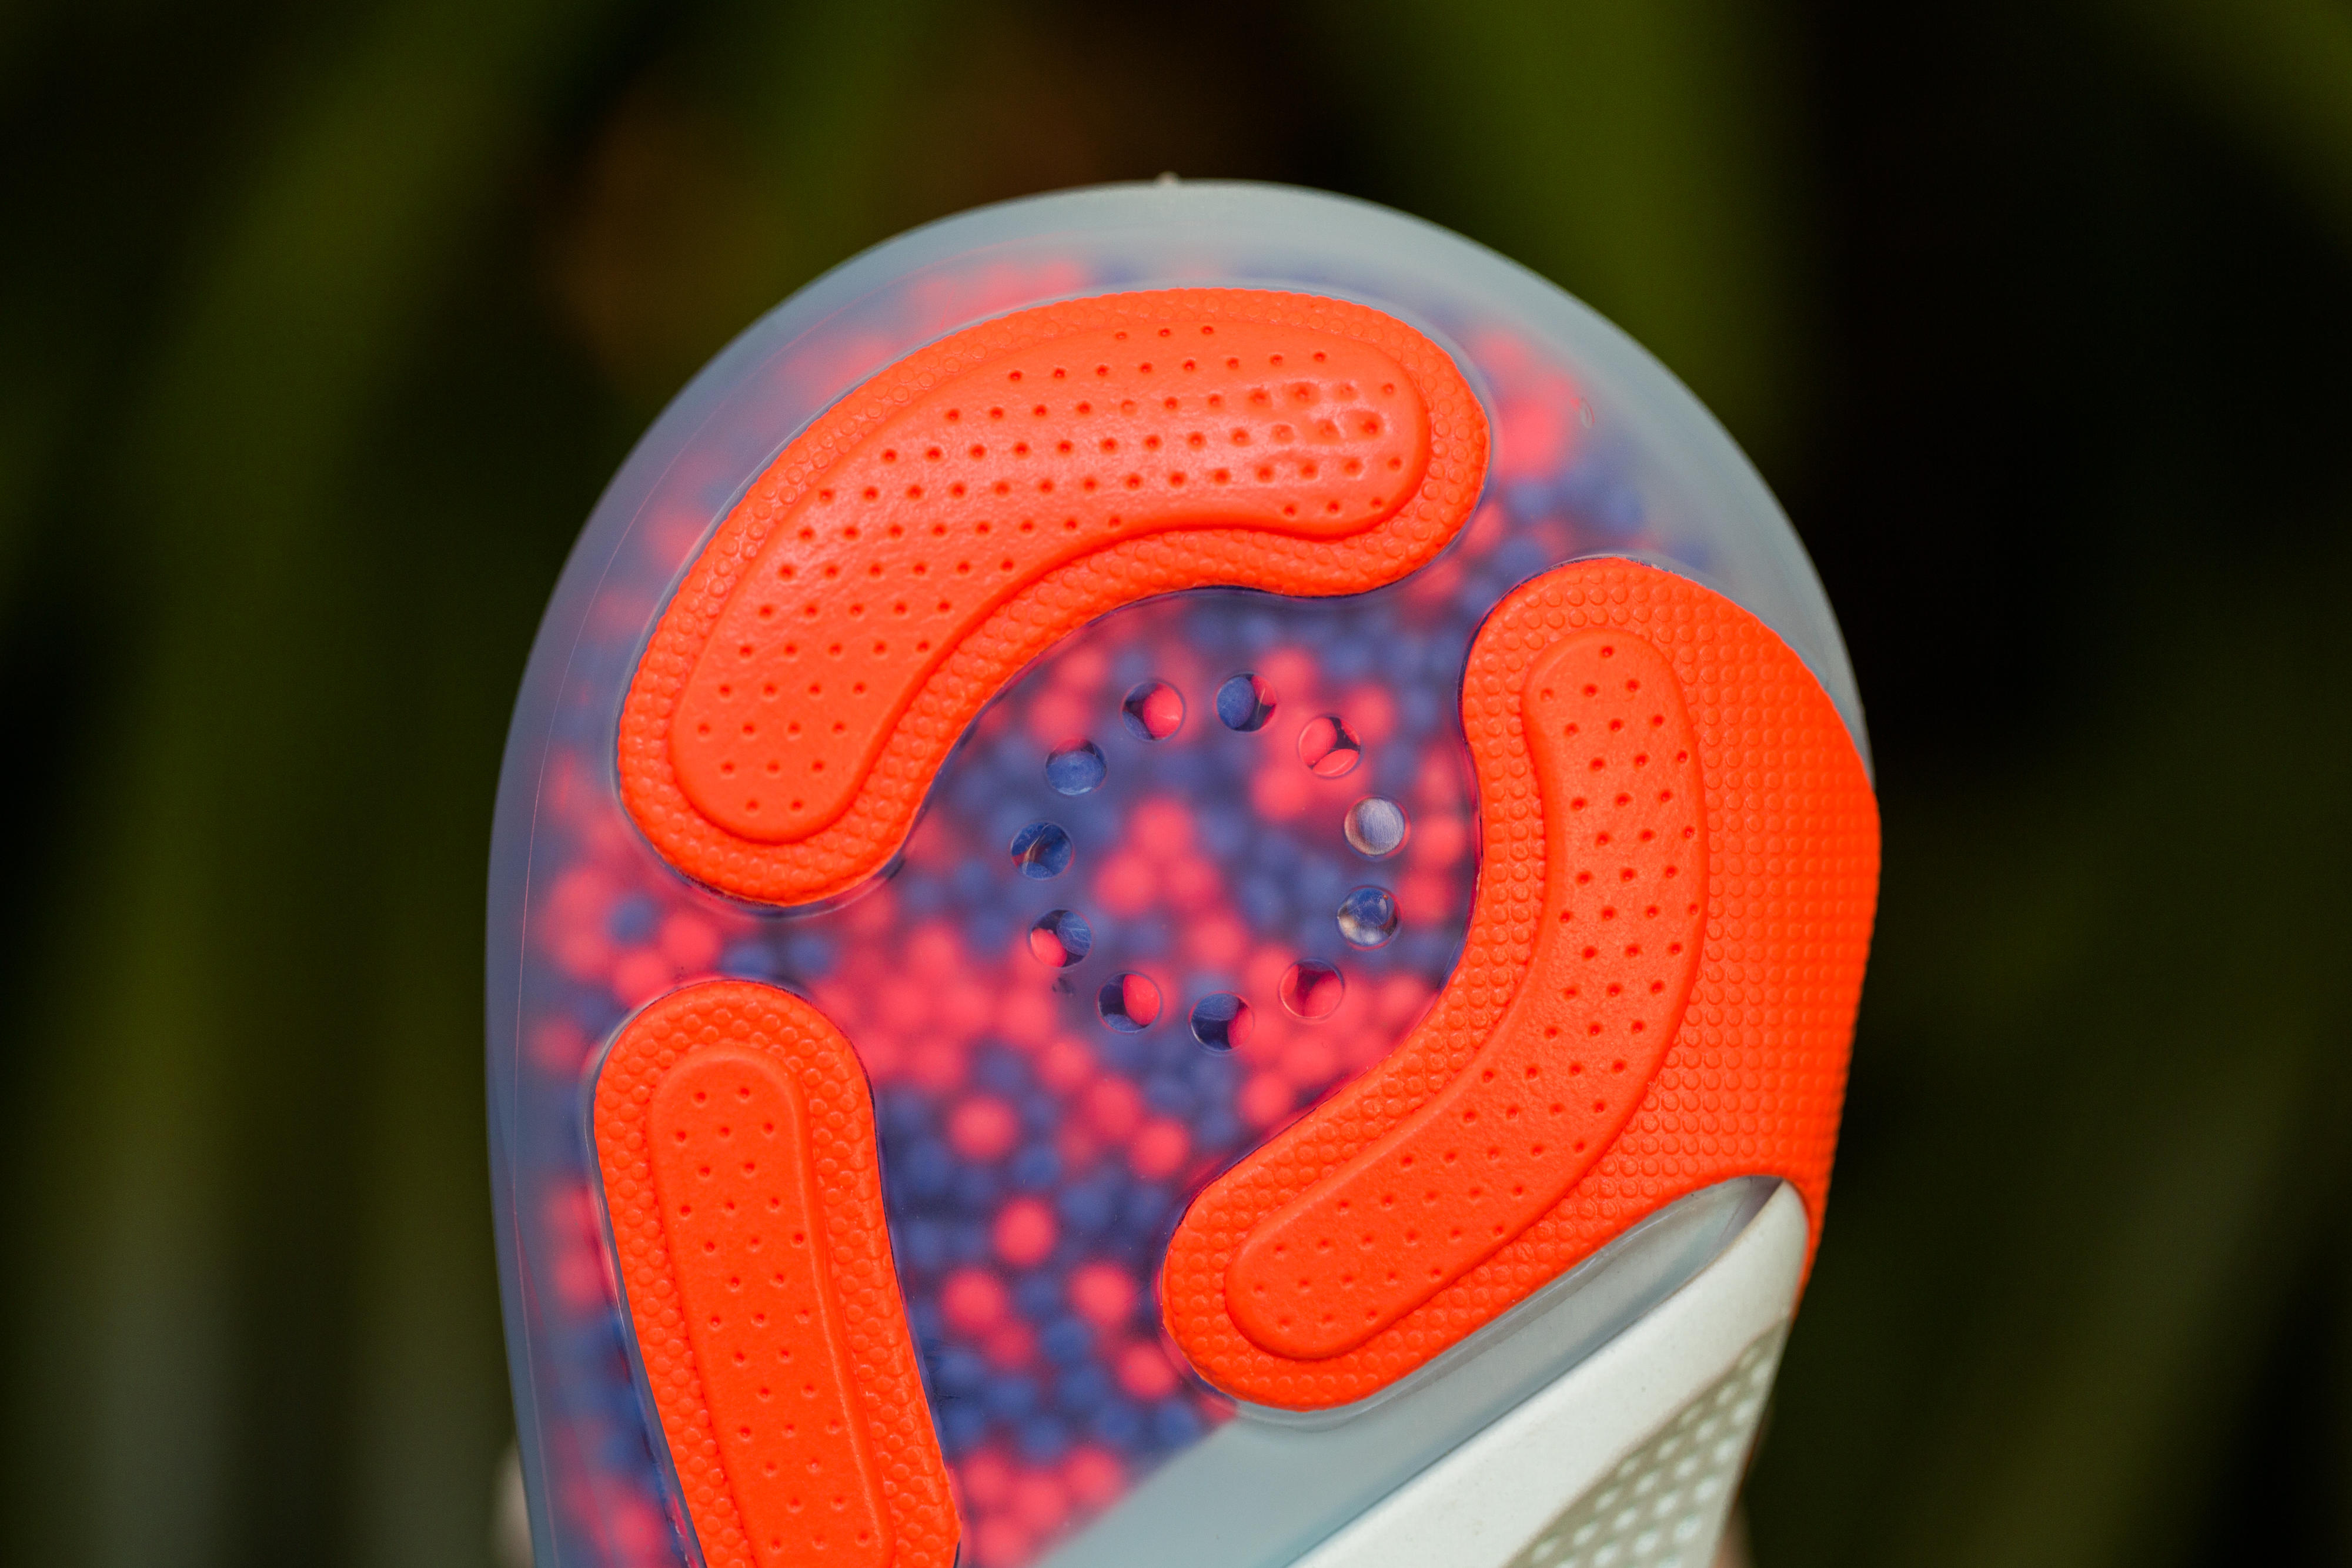 nike shoes with balls in sole